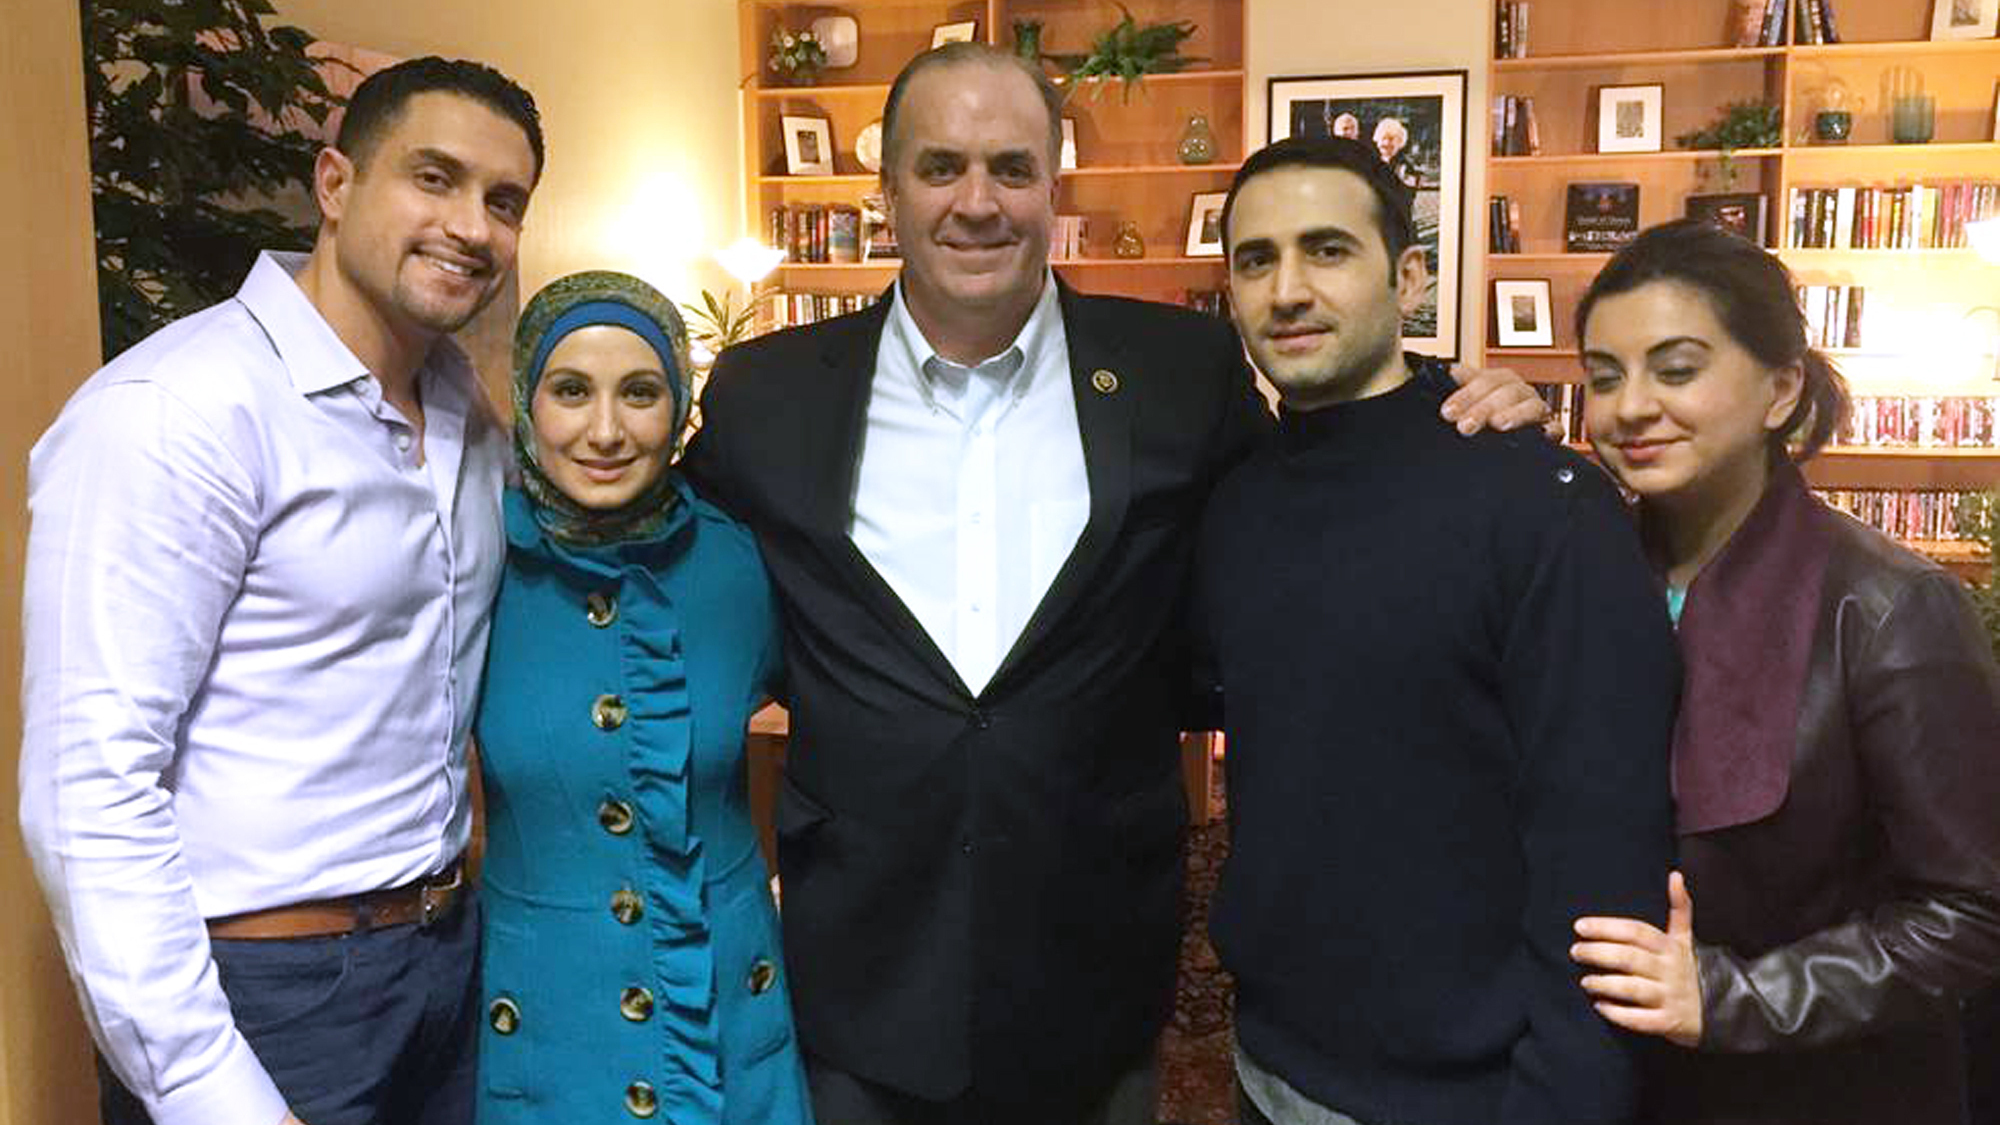 In a photo provided by the Hekmati family, Amir Hekmati (second from right) meets with relatives and U.S. Rep. Dan Kildee at the Landstuhl Regional Medical Center in Landstuhl, Germany, on Monday. AP